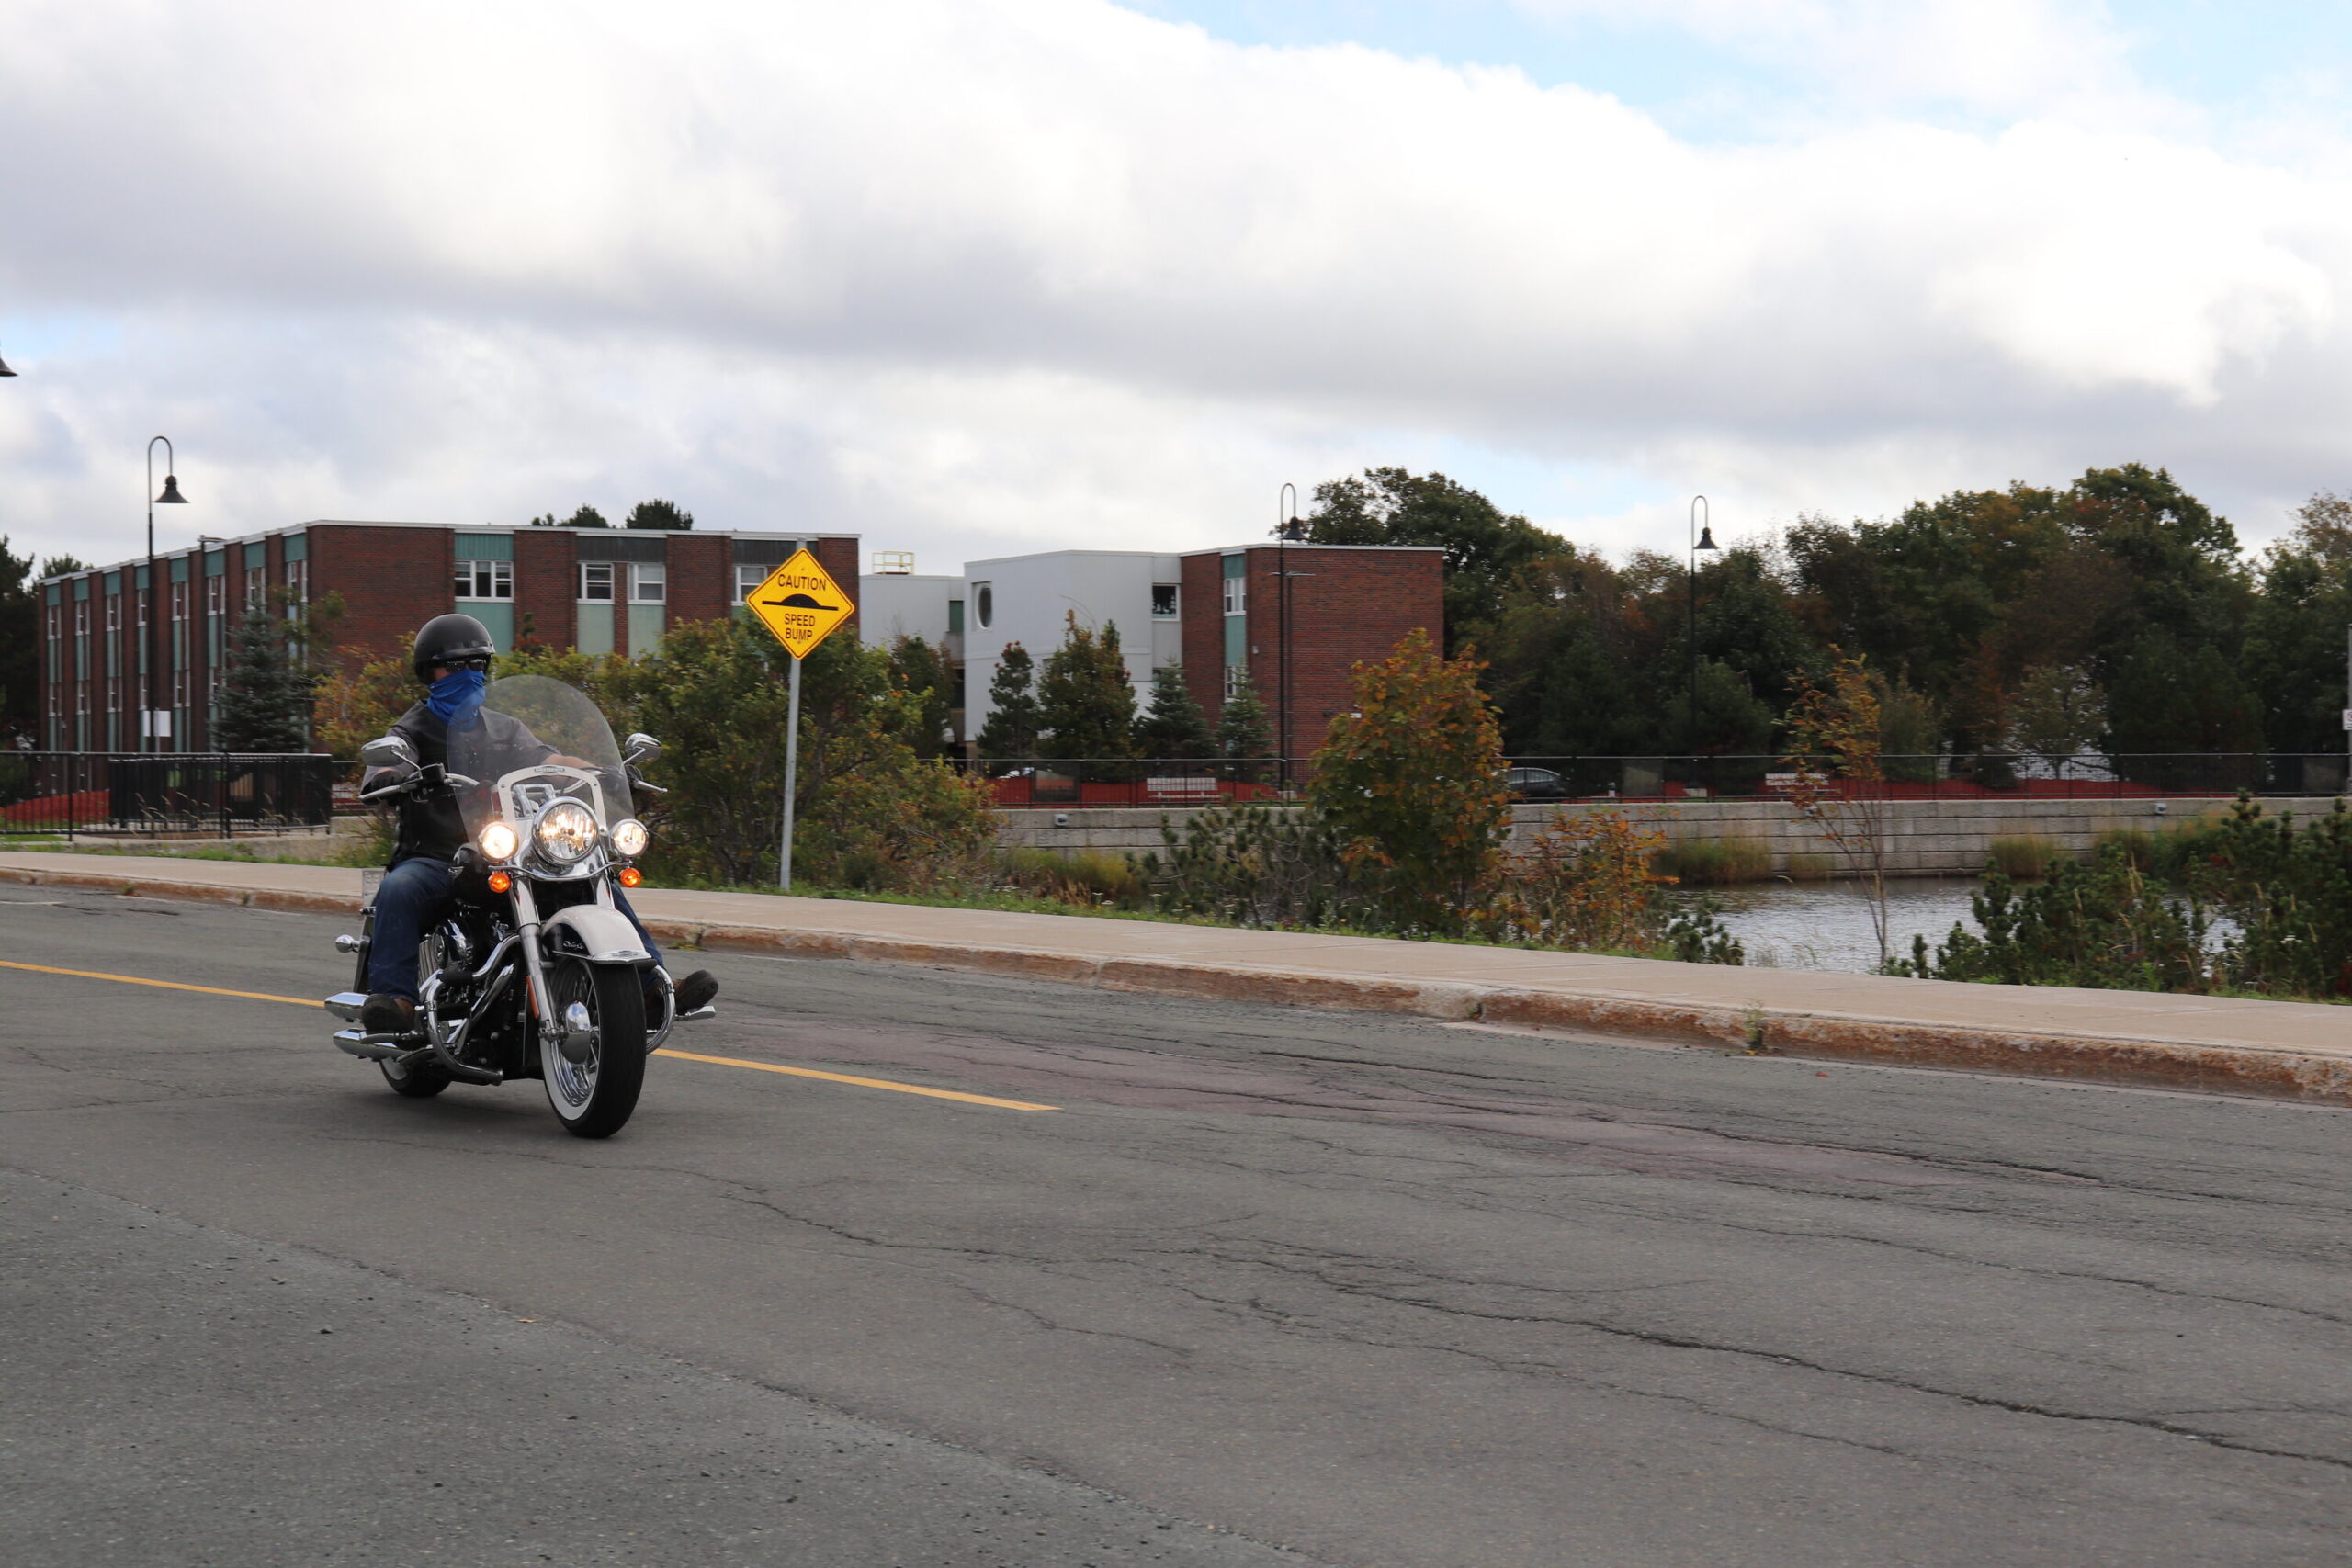 Motorcyclists enjoy a calm fall day. But the risks can be plentiful.